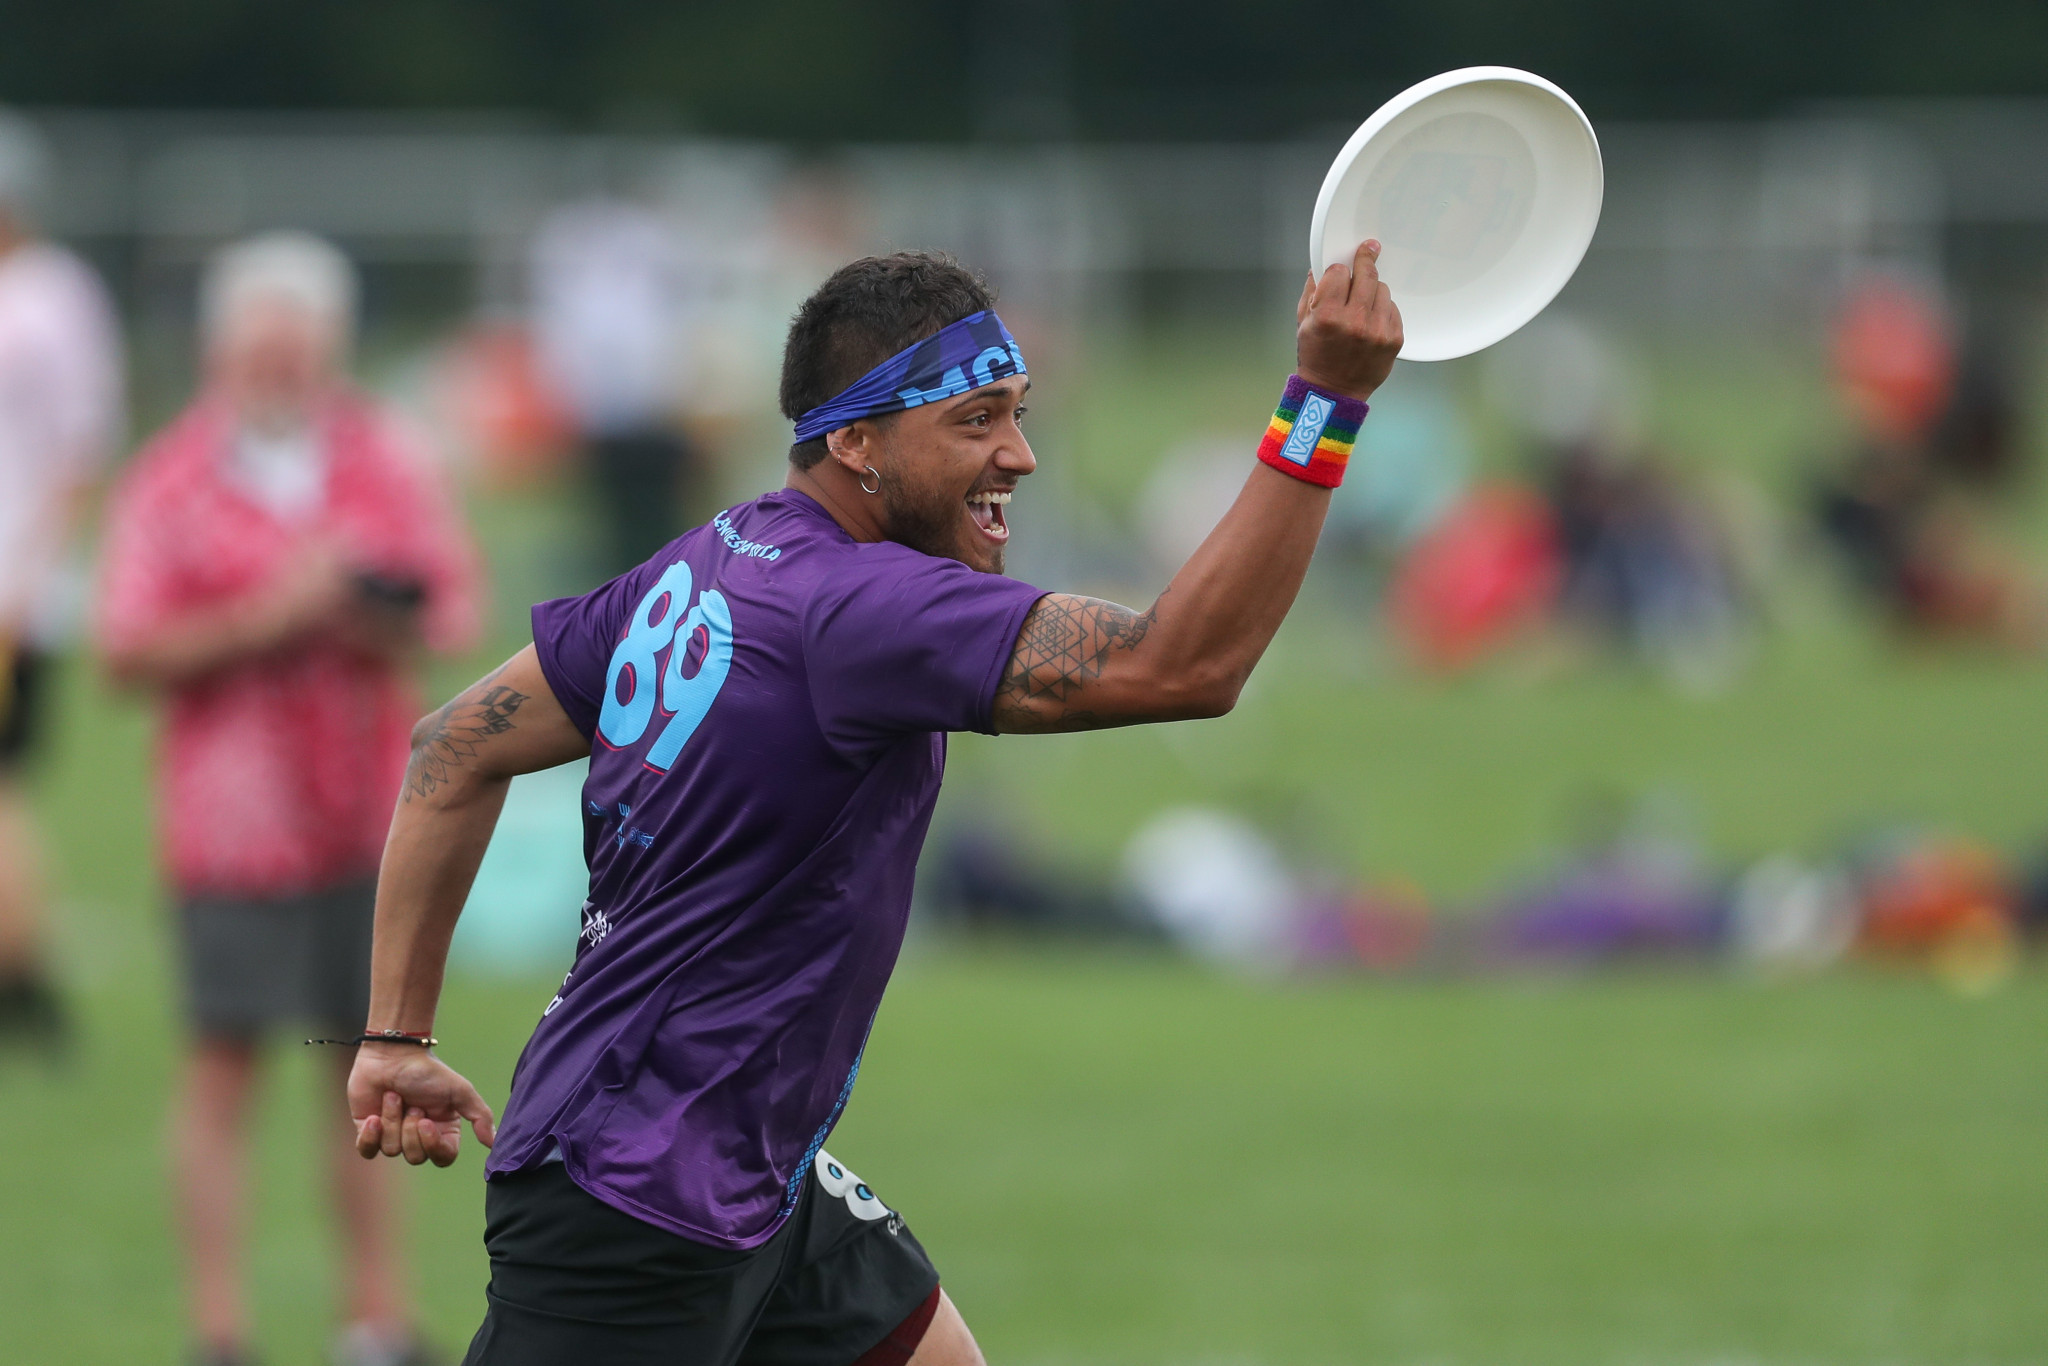 Macondo's Santiago Benjumea Restrepo bagged six goals against Catchup to lead his team to third in Pool A of the mixed team event ©Paul Rutherford for UltiPhotos